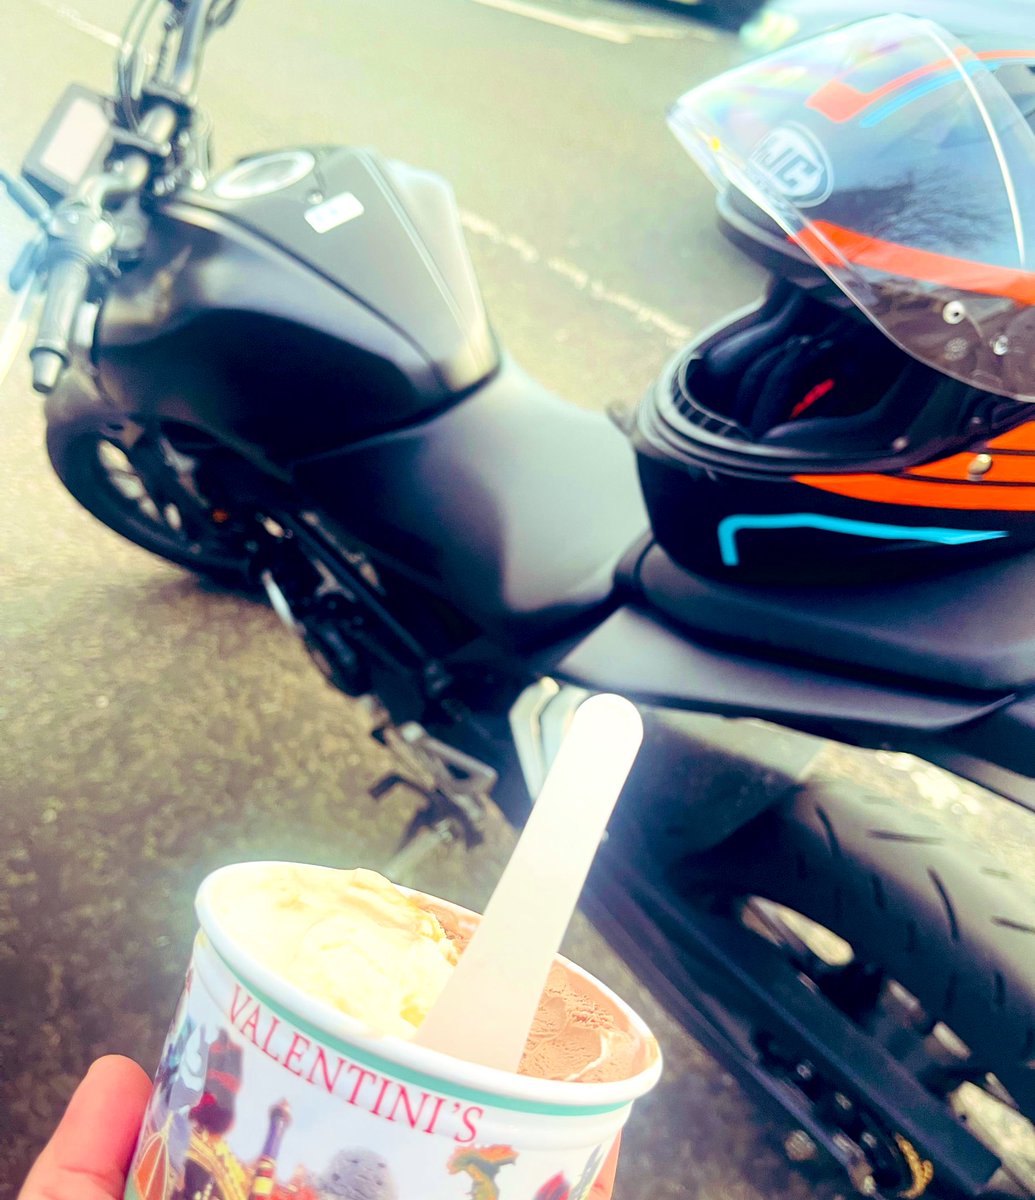 What a treat - a bike ride and stopping off for ice cream Living the life 😂 Have a great weekend ❤️